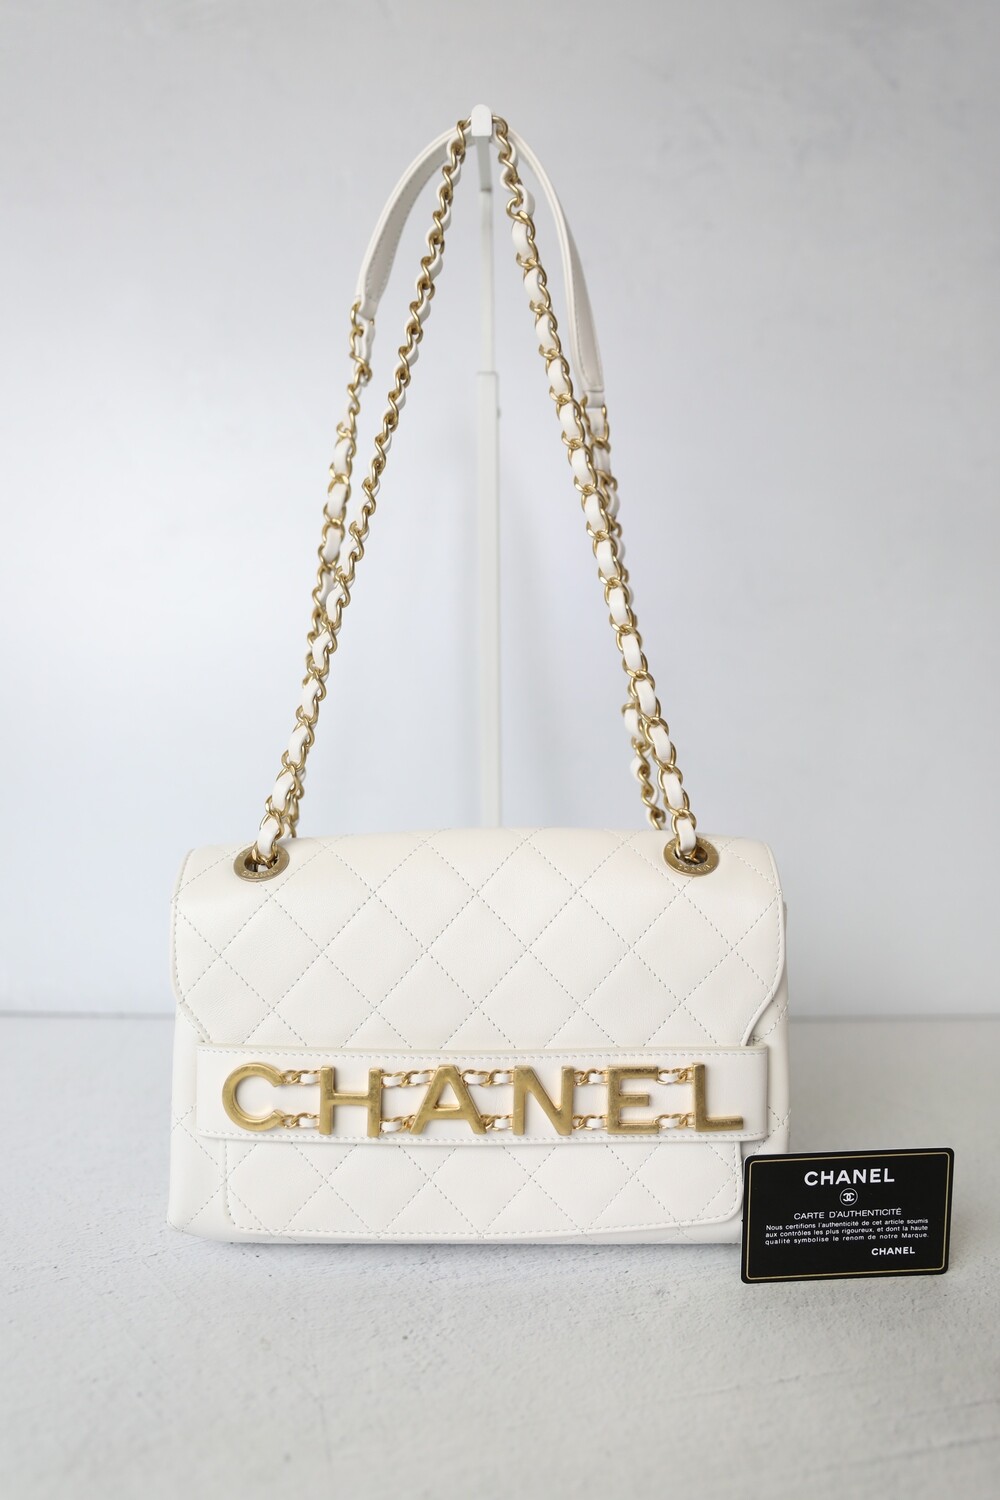 Chanel Enchained Flap Medium, White Leather with Brushed Gold Hardware,  Preowned in Dustbag CMA001 - Julia Rose Boston